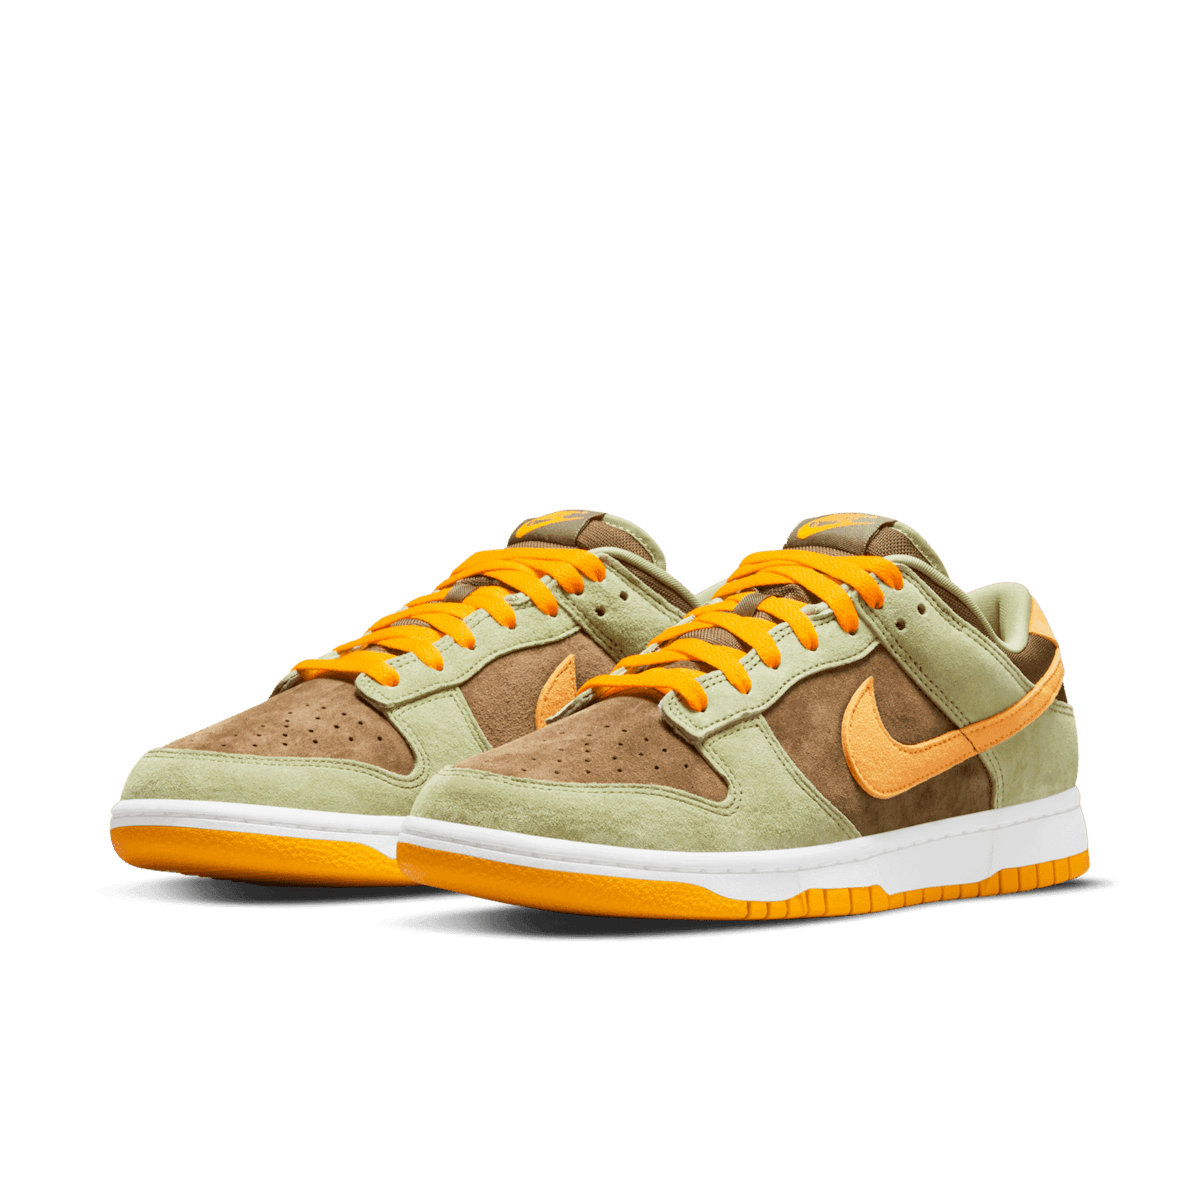 Dusty DH5360-300 - and Olive Date Raffles Dunk Nike Release Low